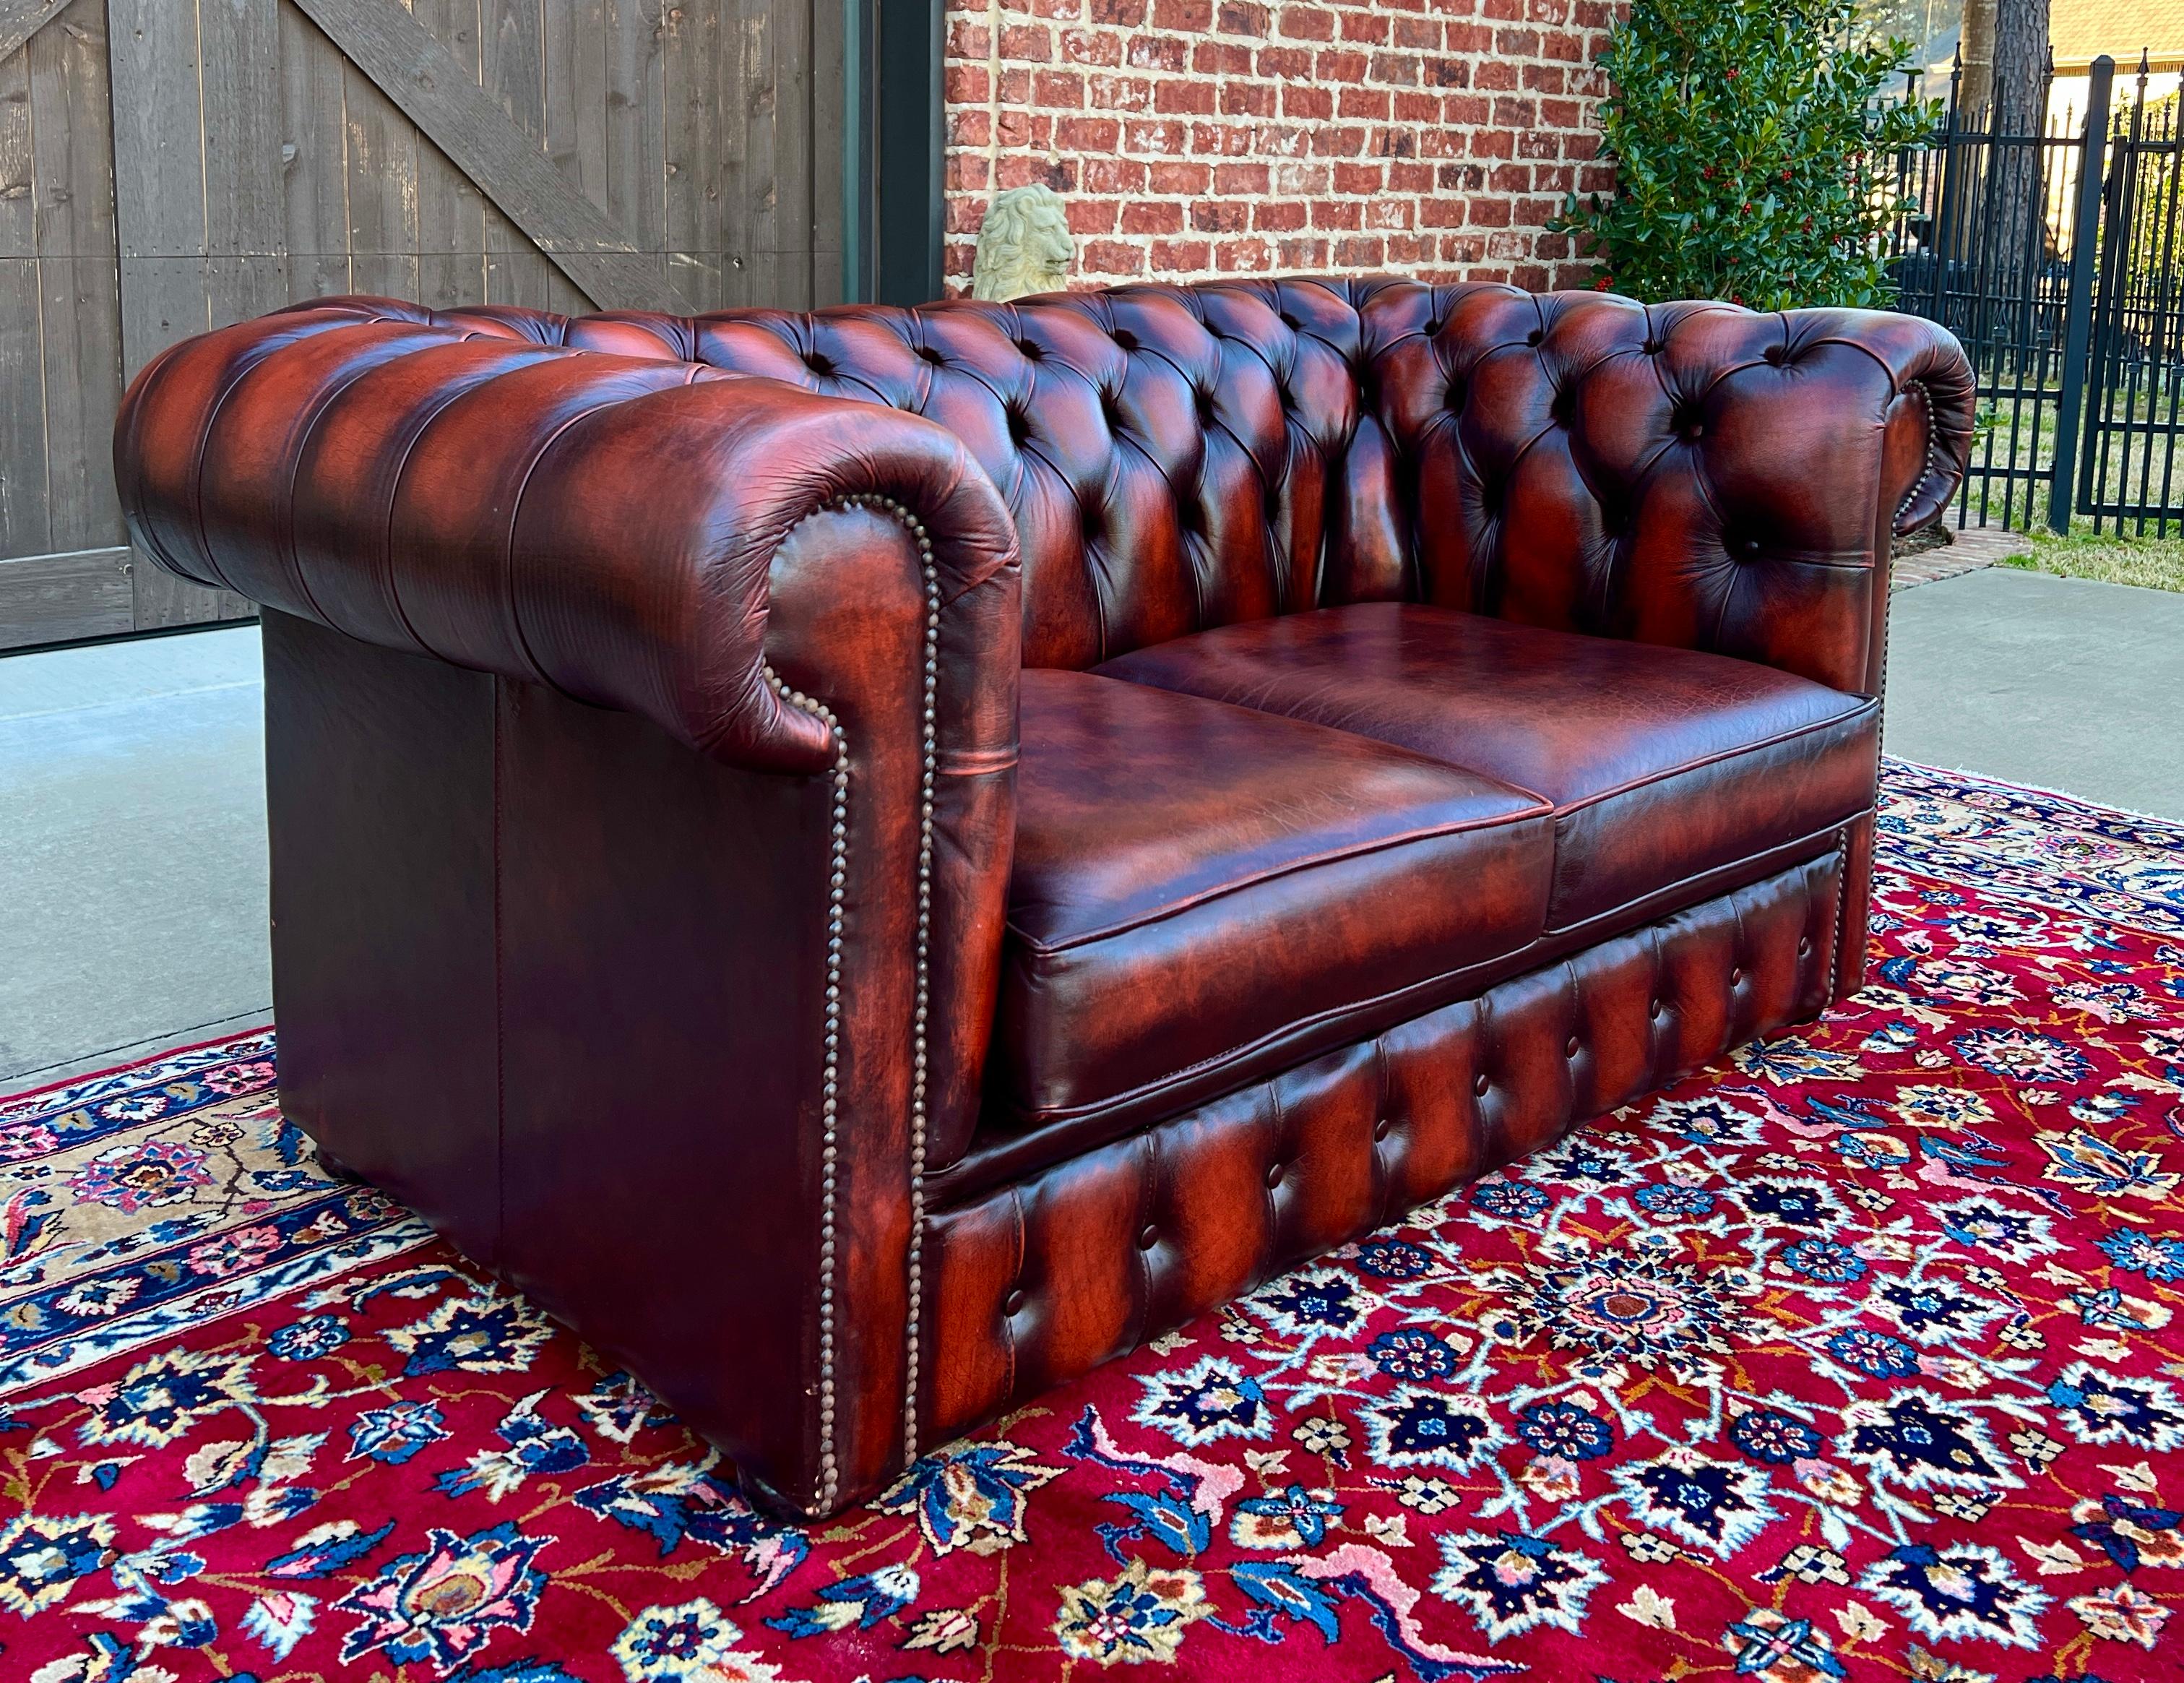 20th Century Vintage English Chesterfield Leather Tufted Love Seat Sofa Oxblood Red #2 For Sale